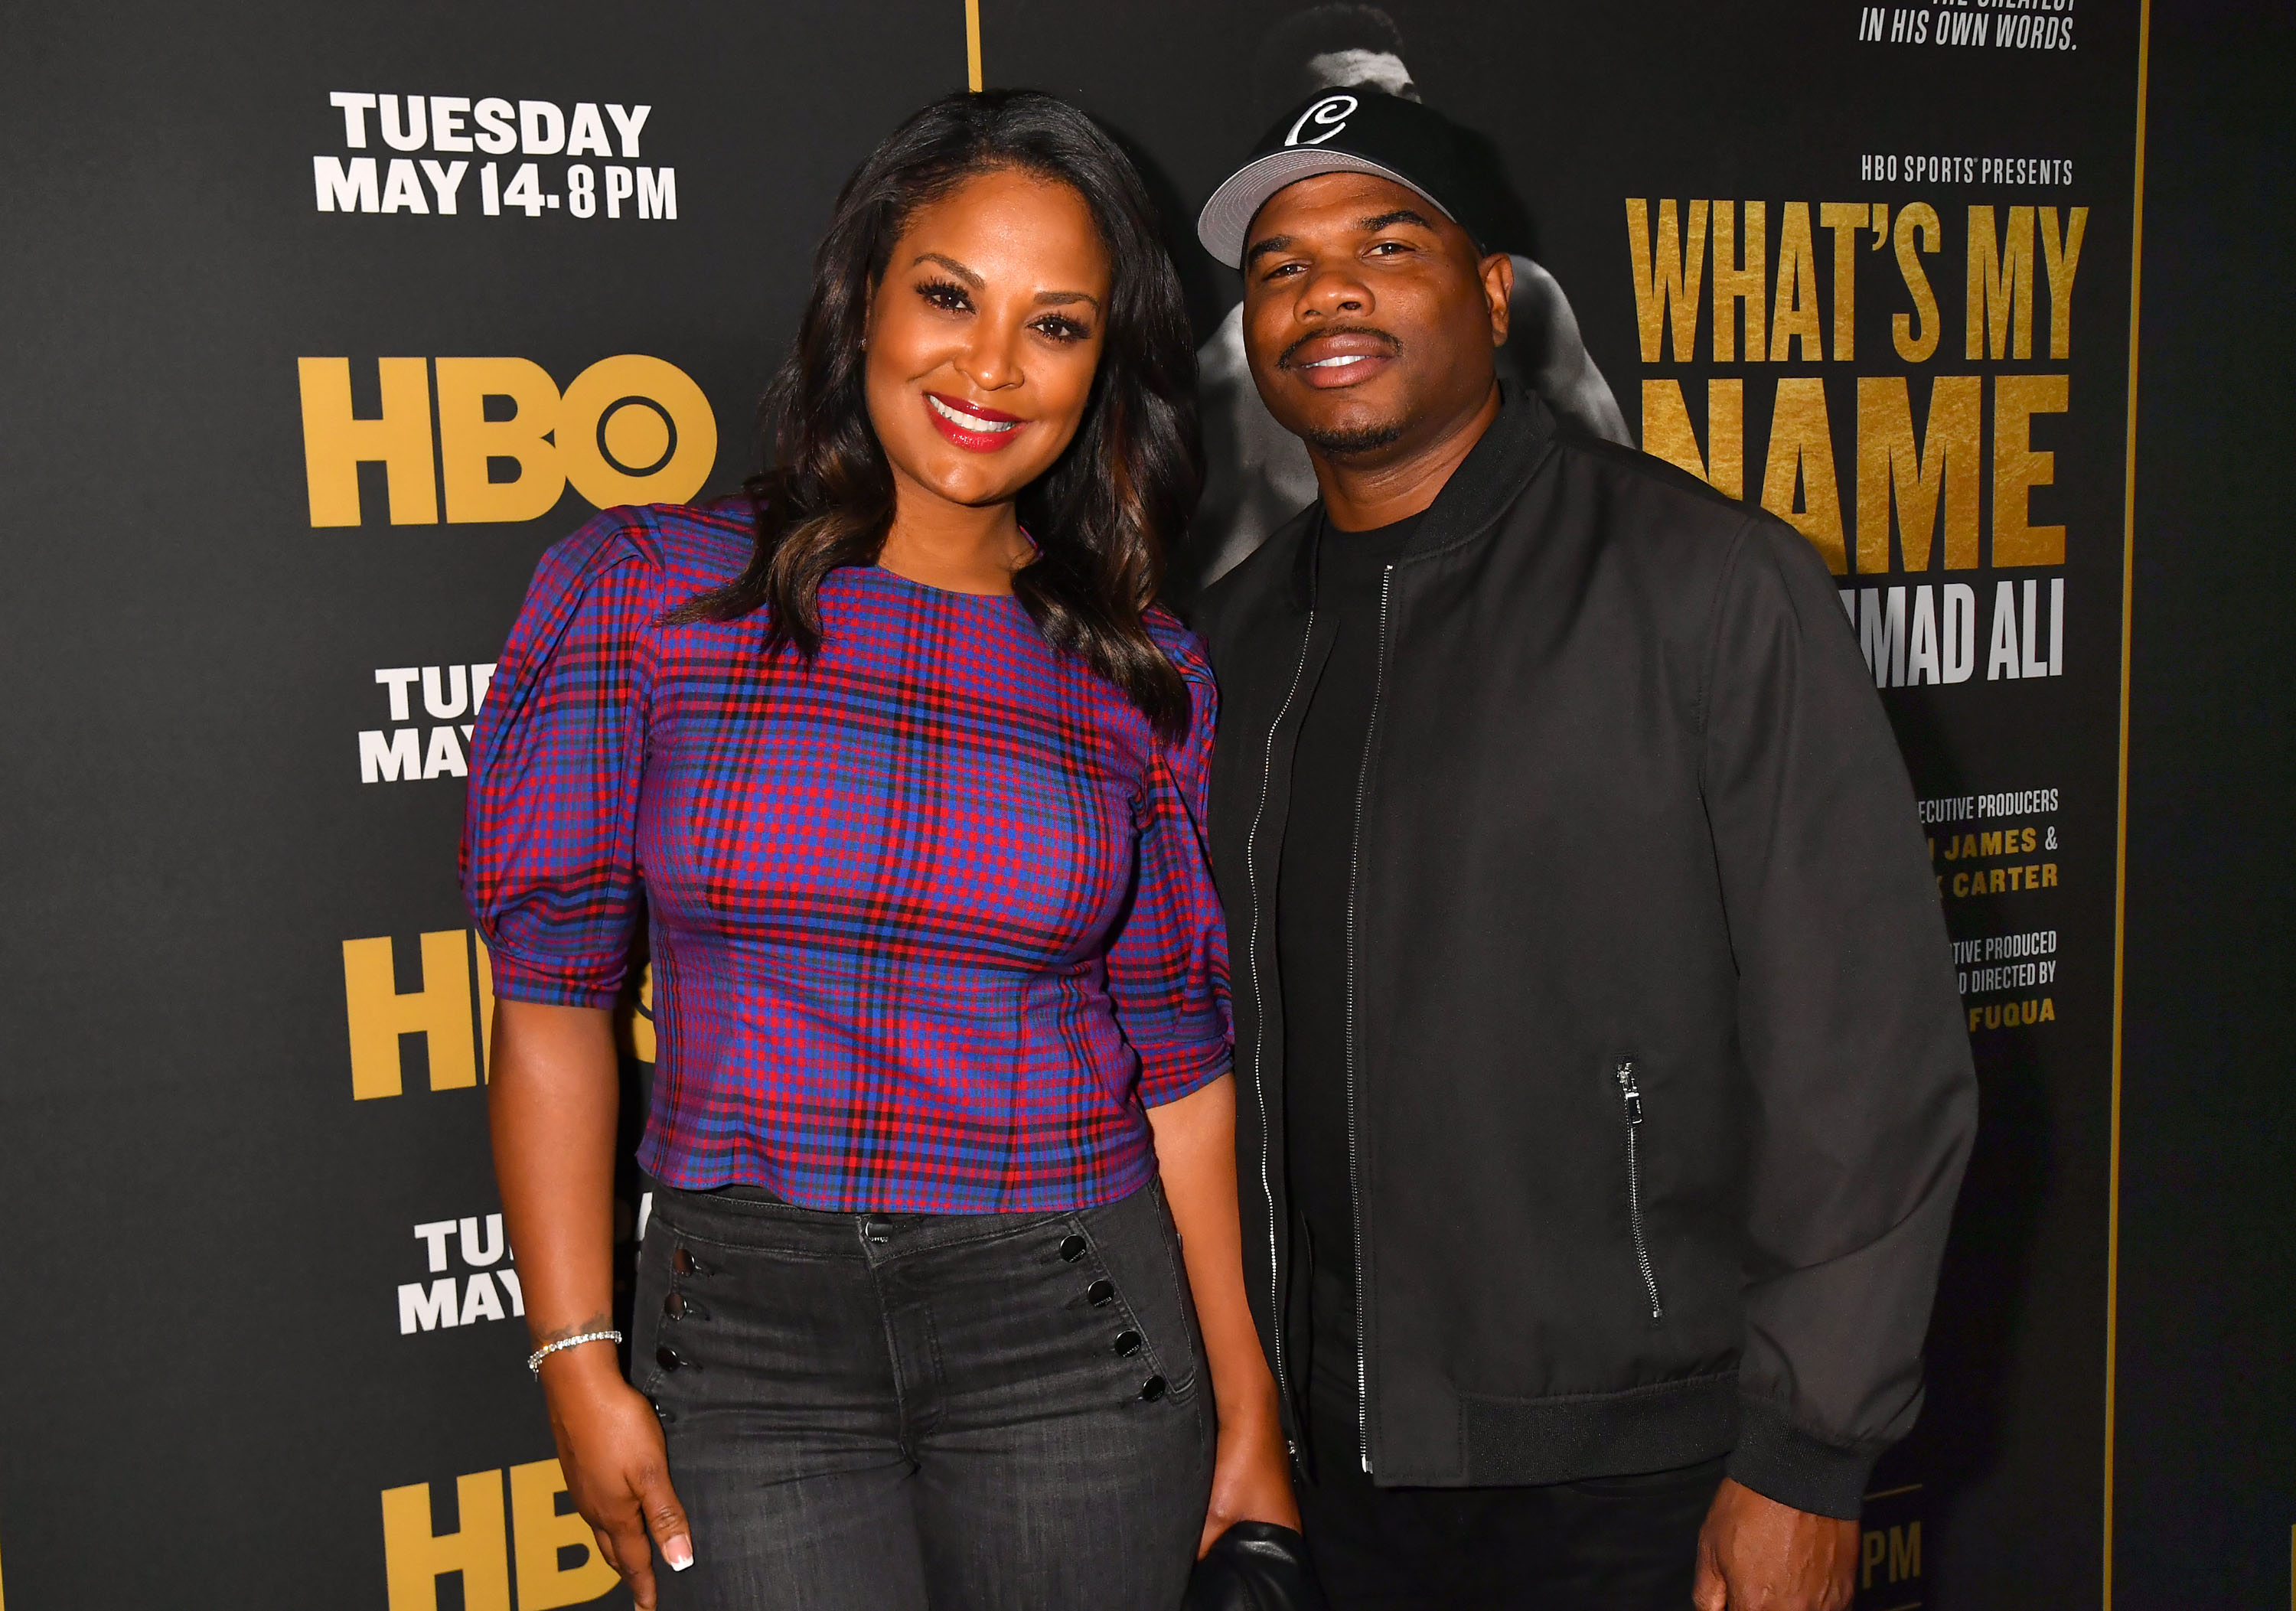 Laila Ali and Curtis Conway